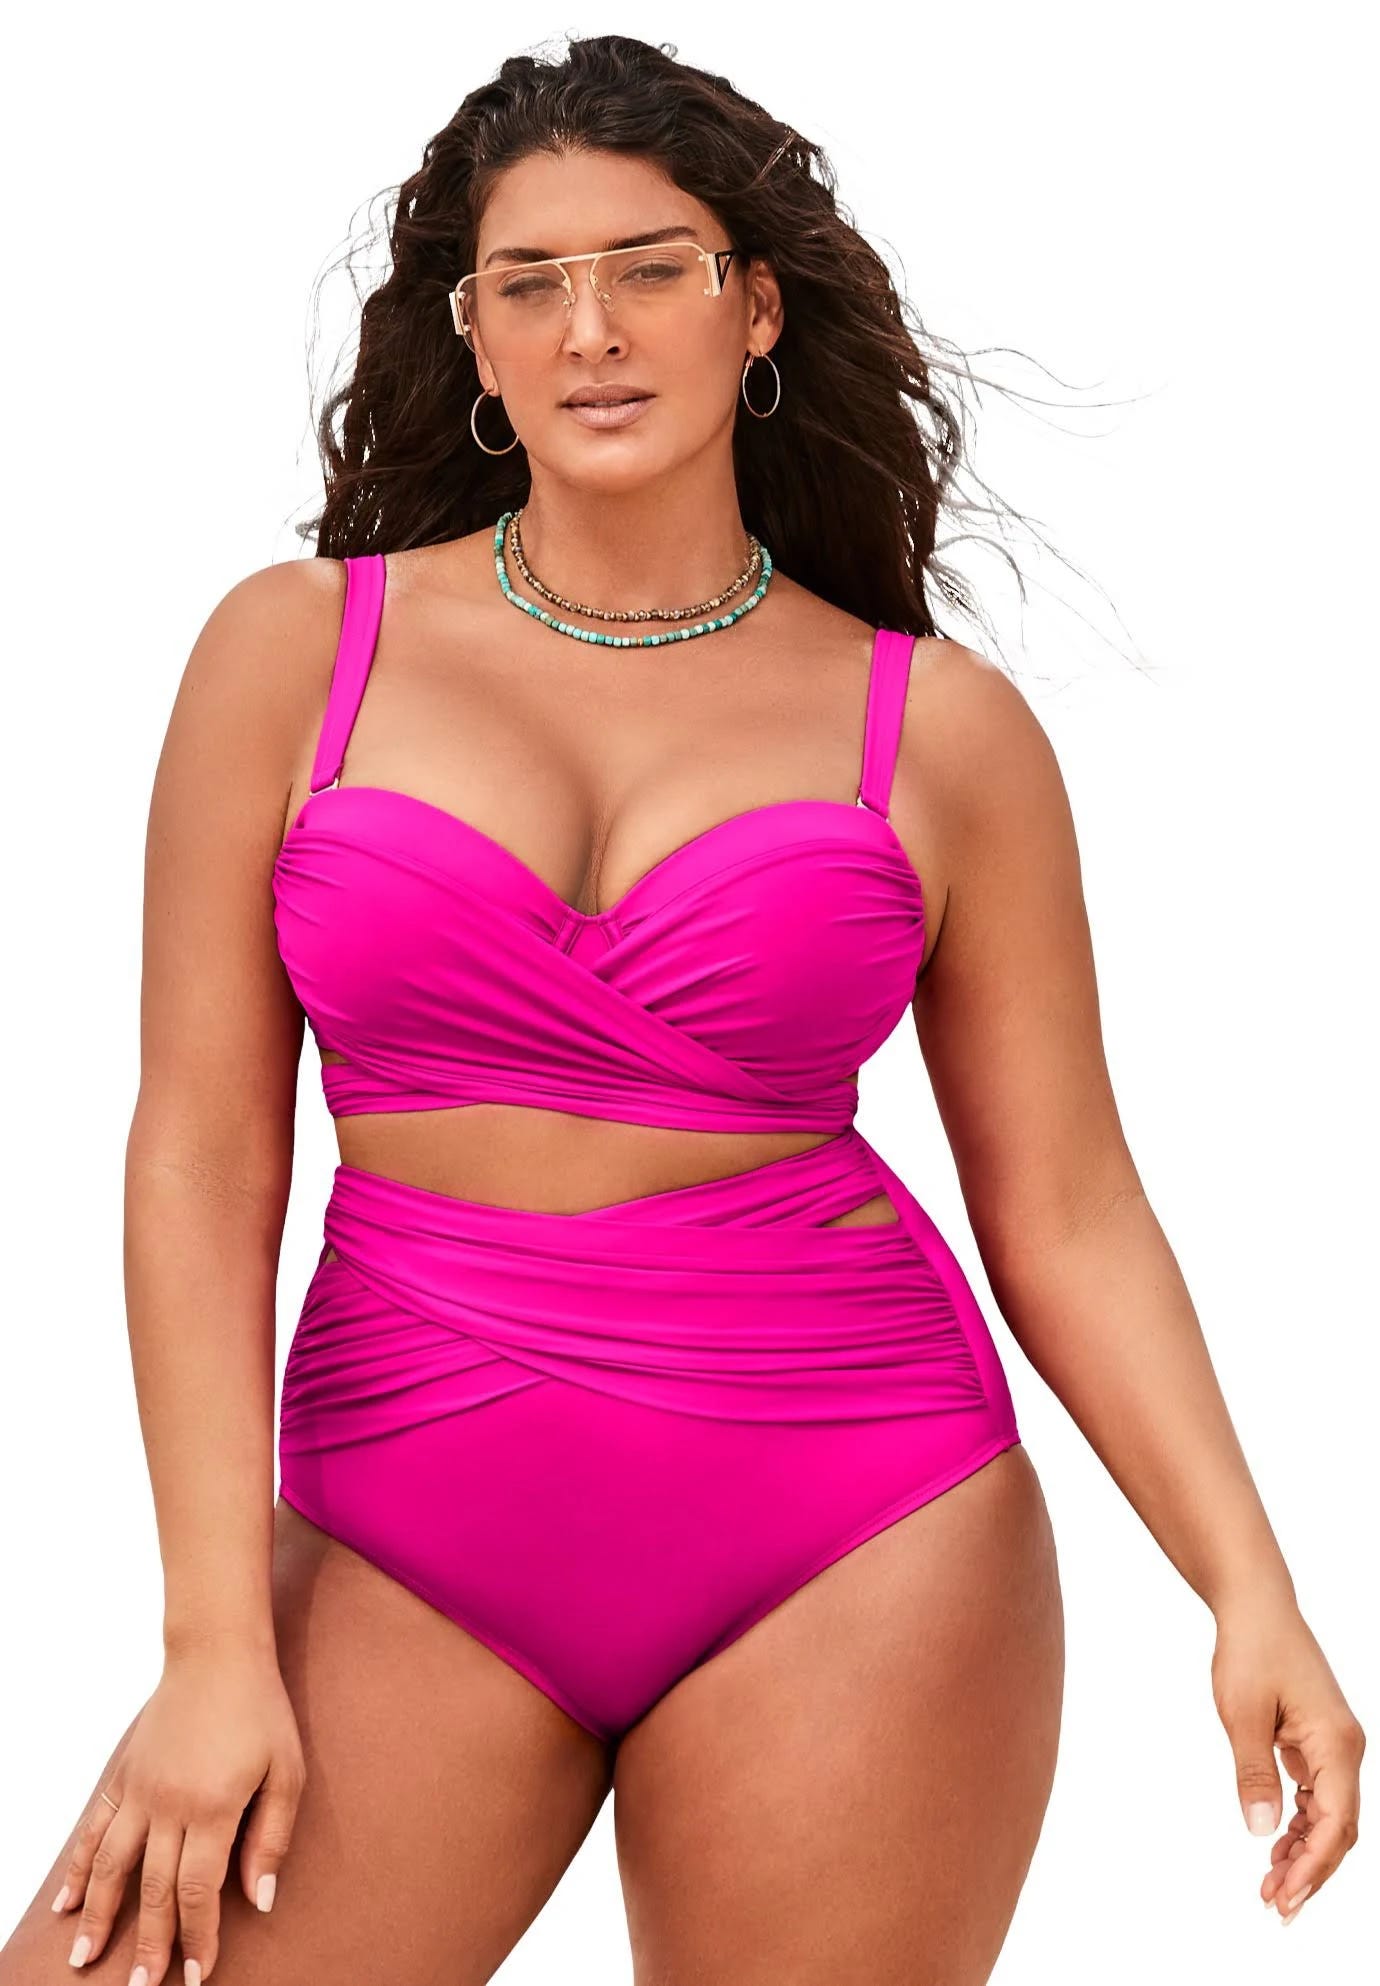 Chic plus size pink bikini top for summer | Image